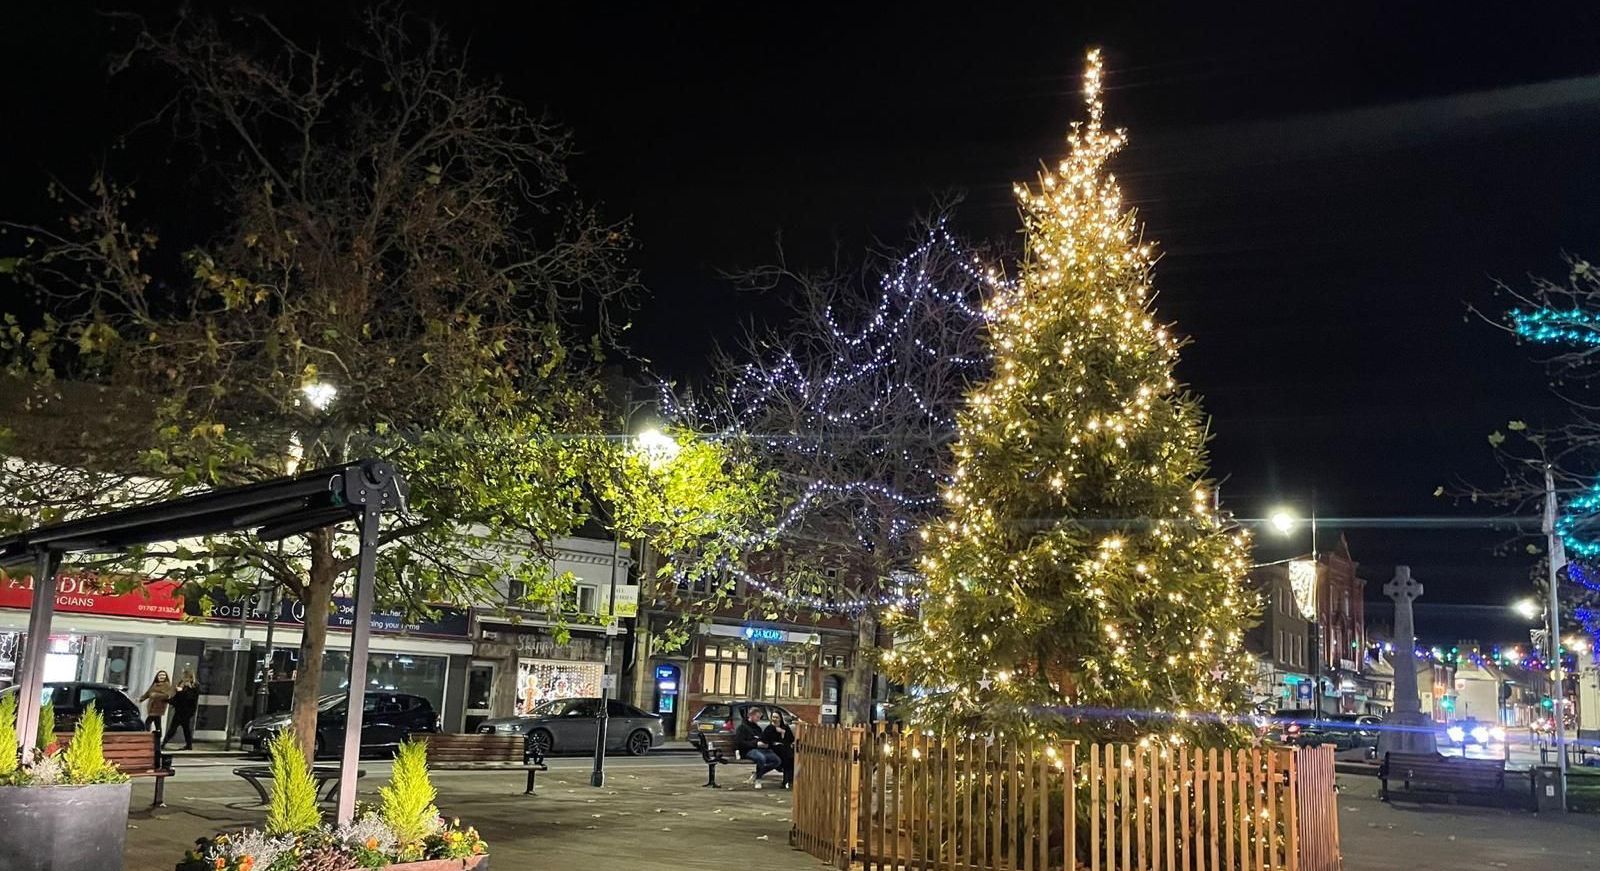 A beautiful lit up christmas tree in the middle of biggleswade town square